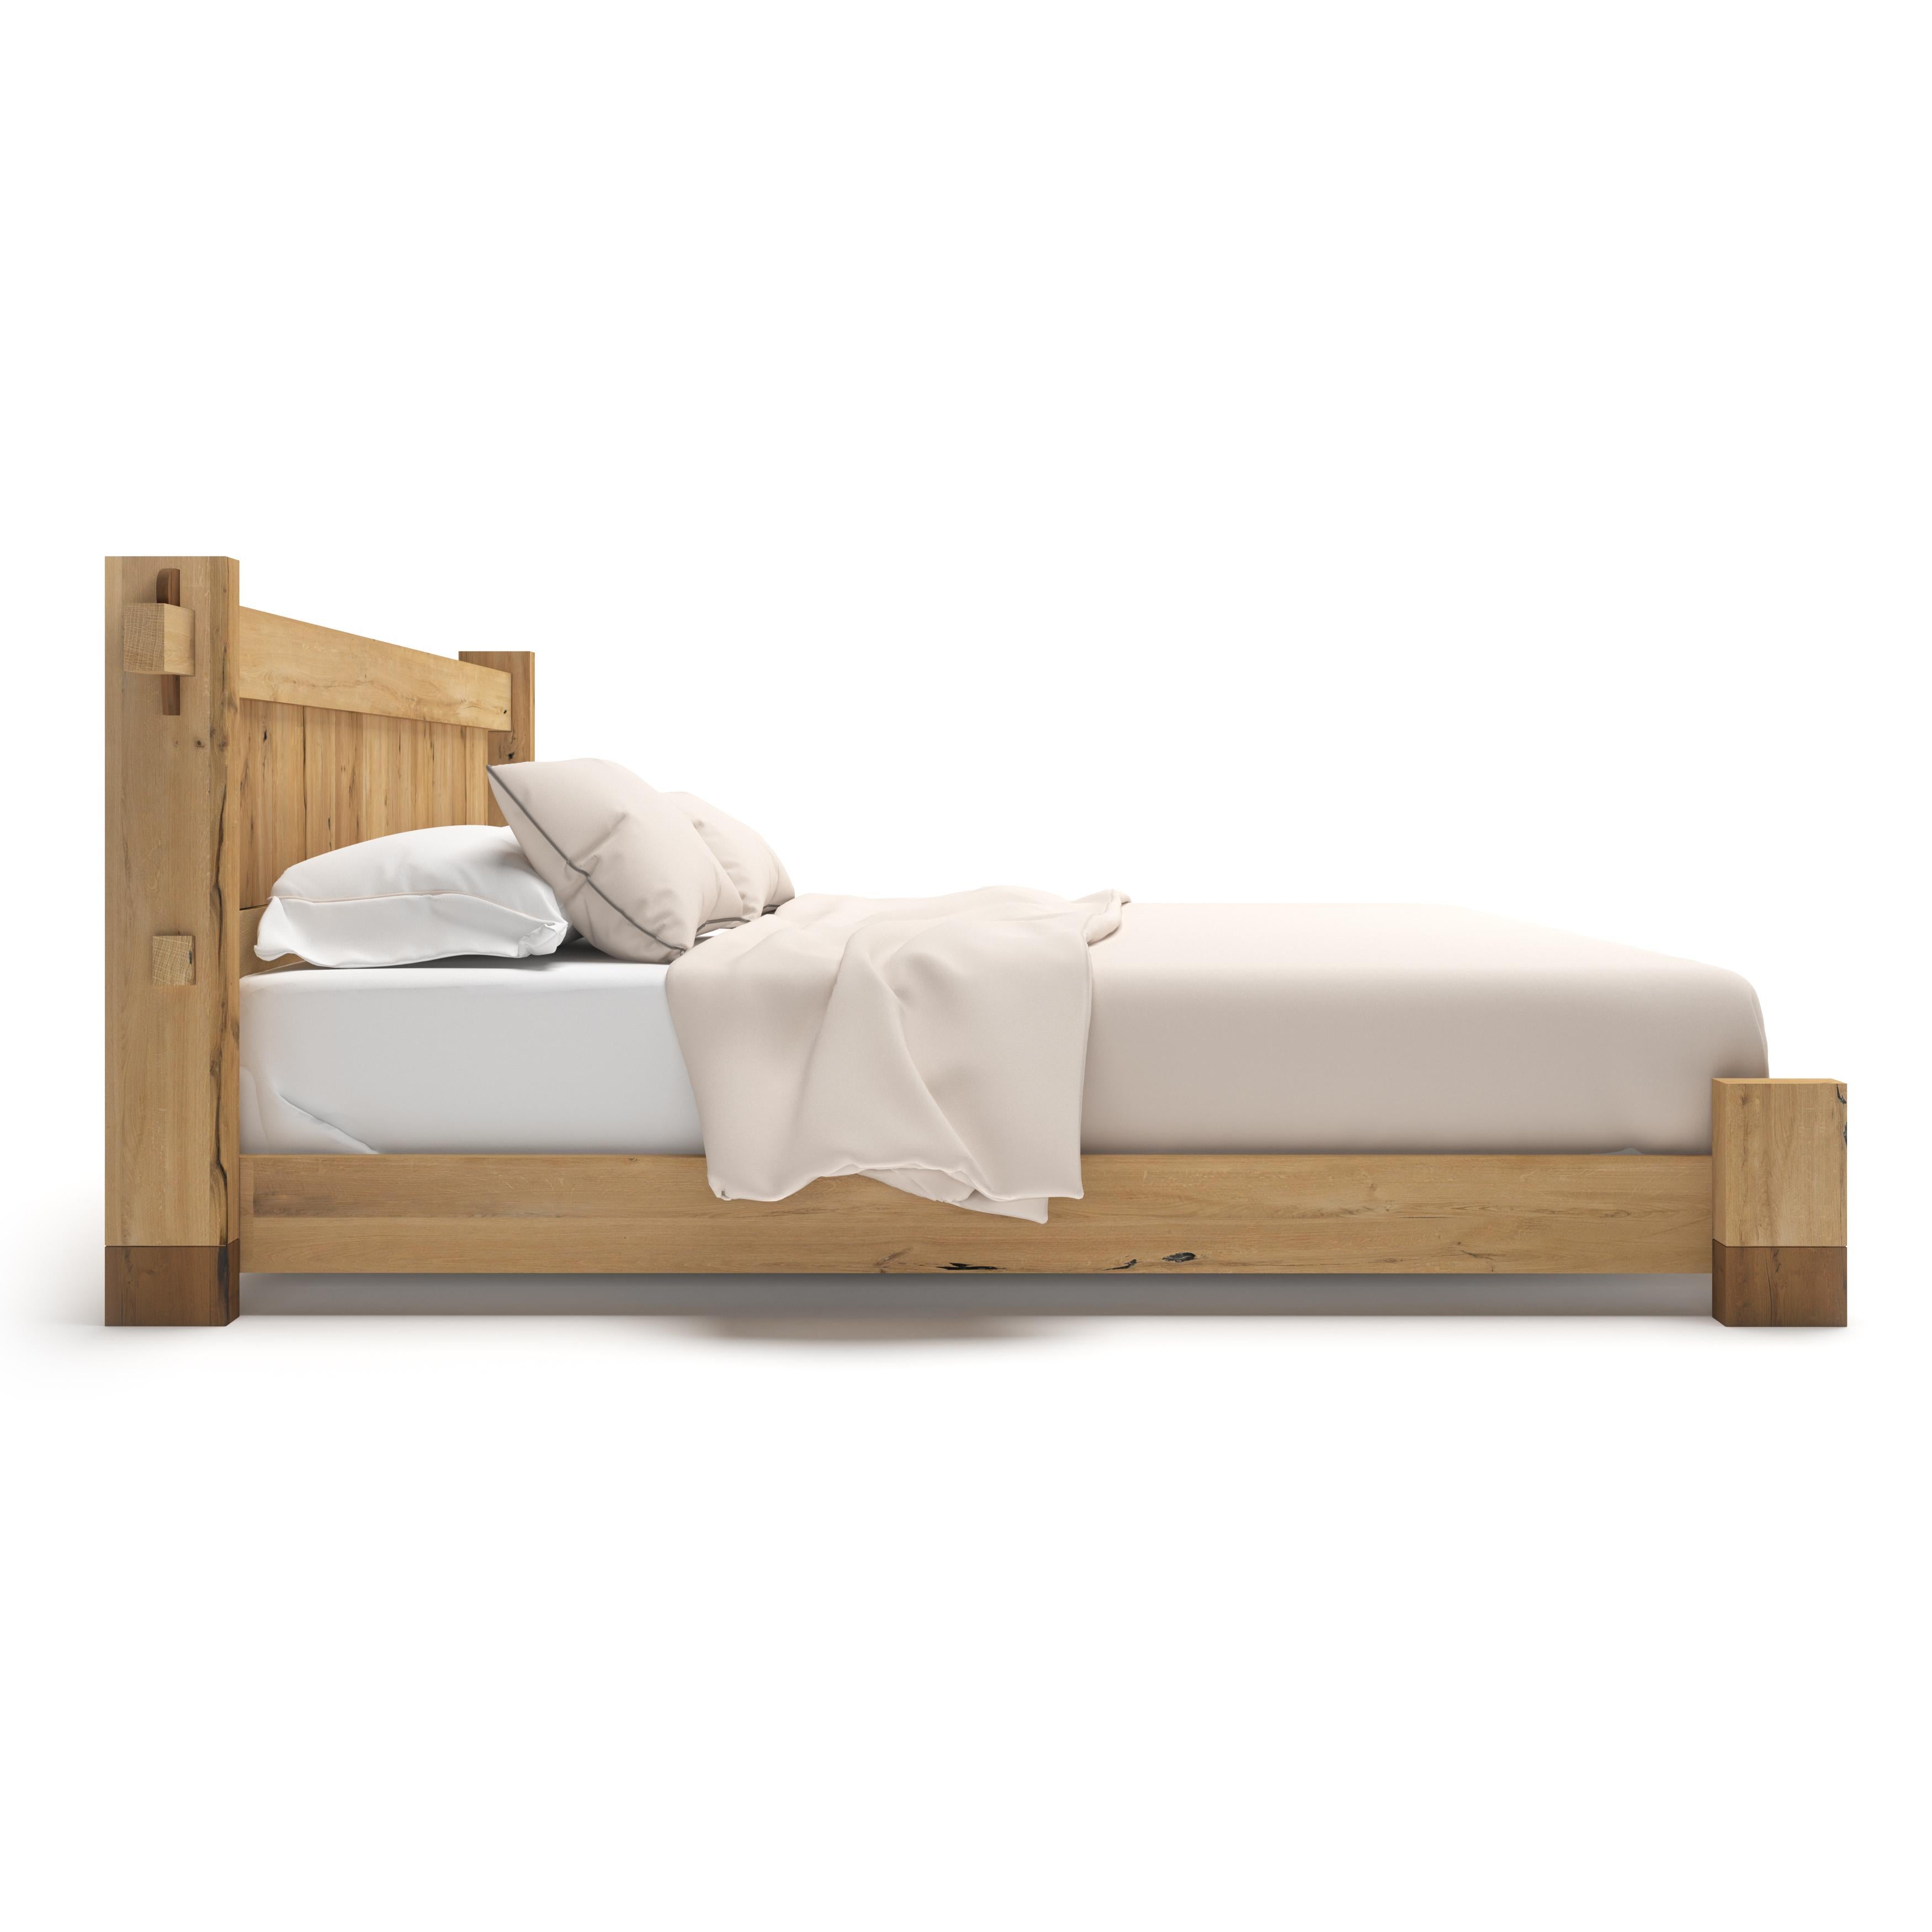 Experience total relaxation with the stylish and comfortable Dala V-Bed. Its wooden connections ensure durability and beauty, while its design provides the ultimate comfort. Unwind in comfort with a bed you can trust!

All Tektōn pieces are made of